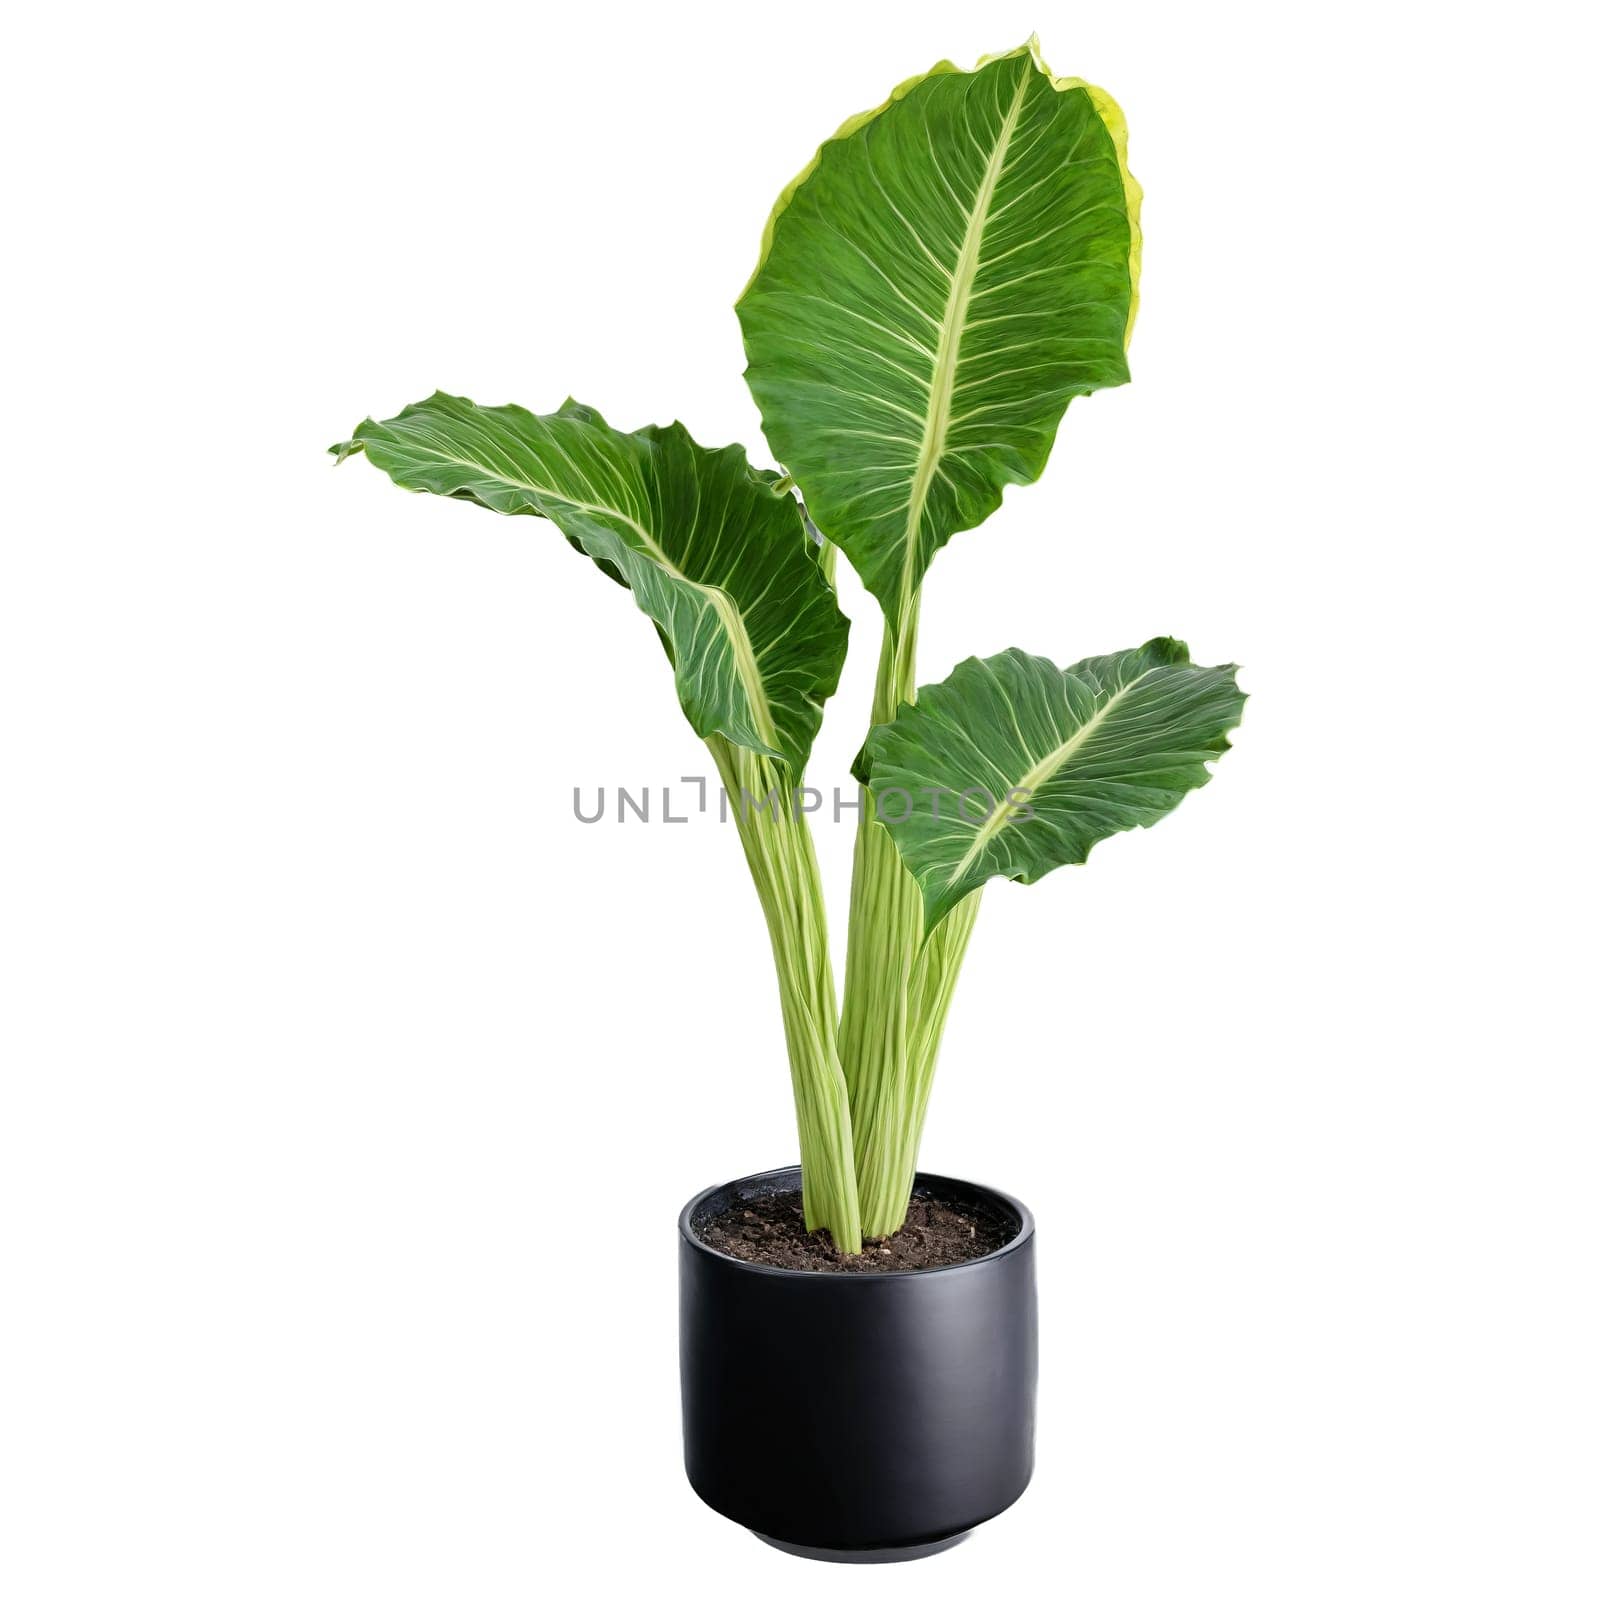 Alocasia large dark green arrow shaped leaves with prominent white veins in a modern black. Plants isolated on transparent background.